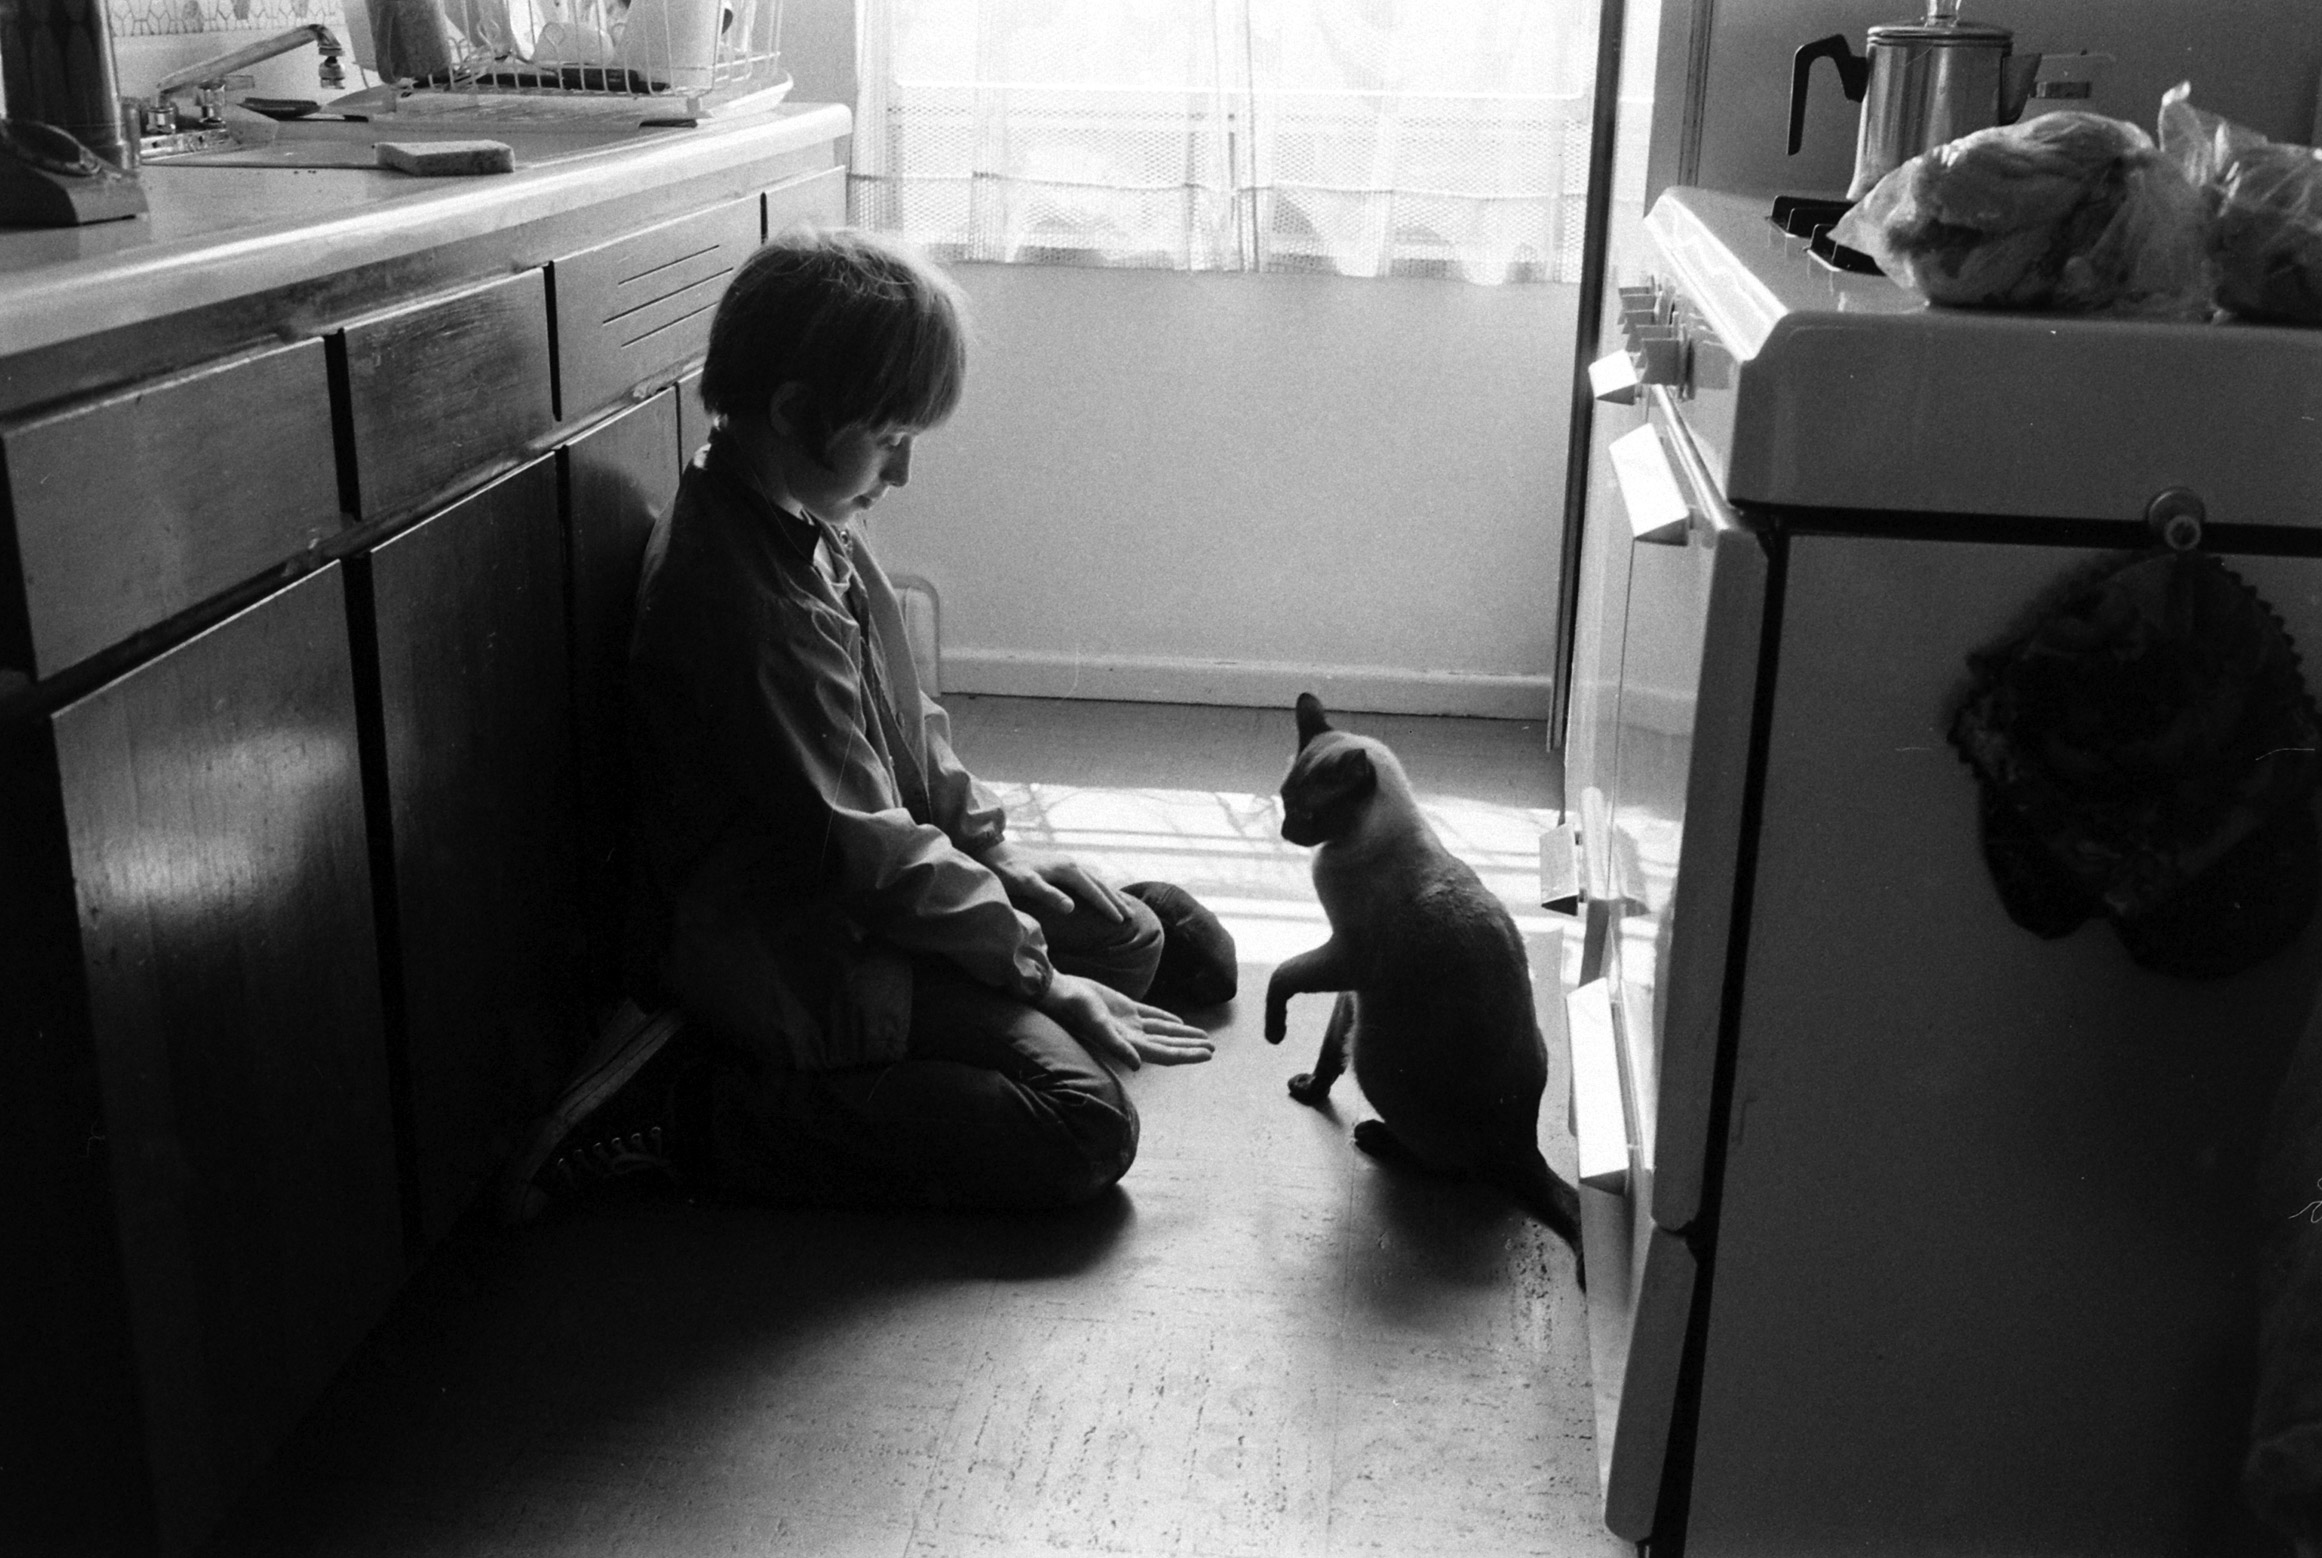 1972 photo essay about Brian Sullivan, a New York City teenager.